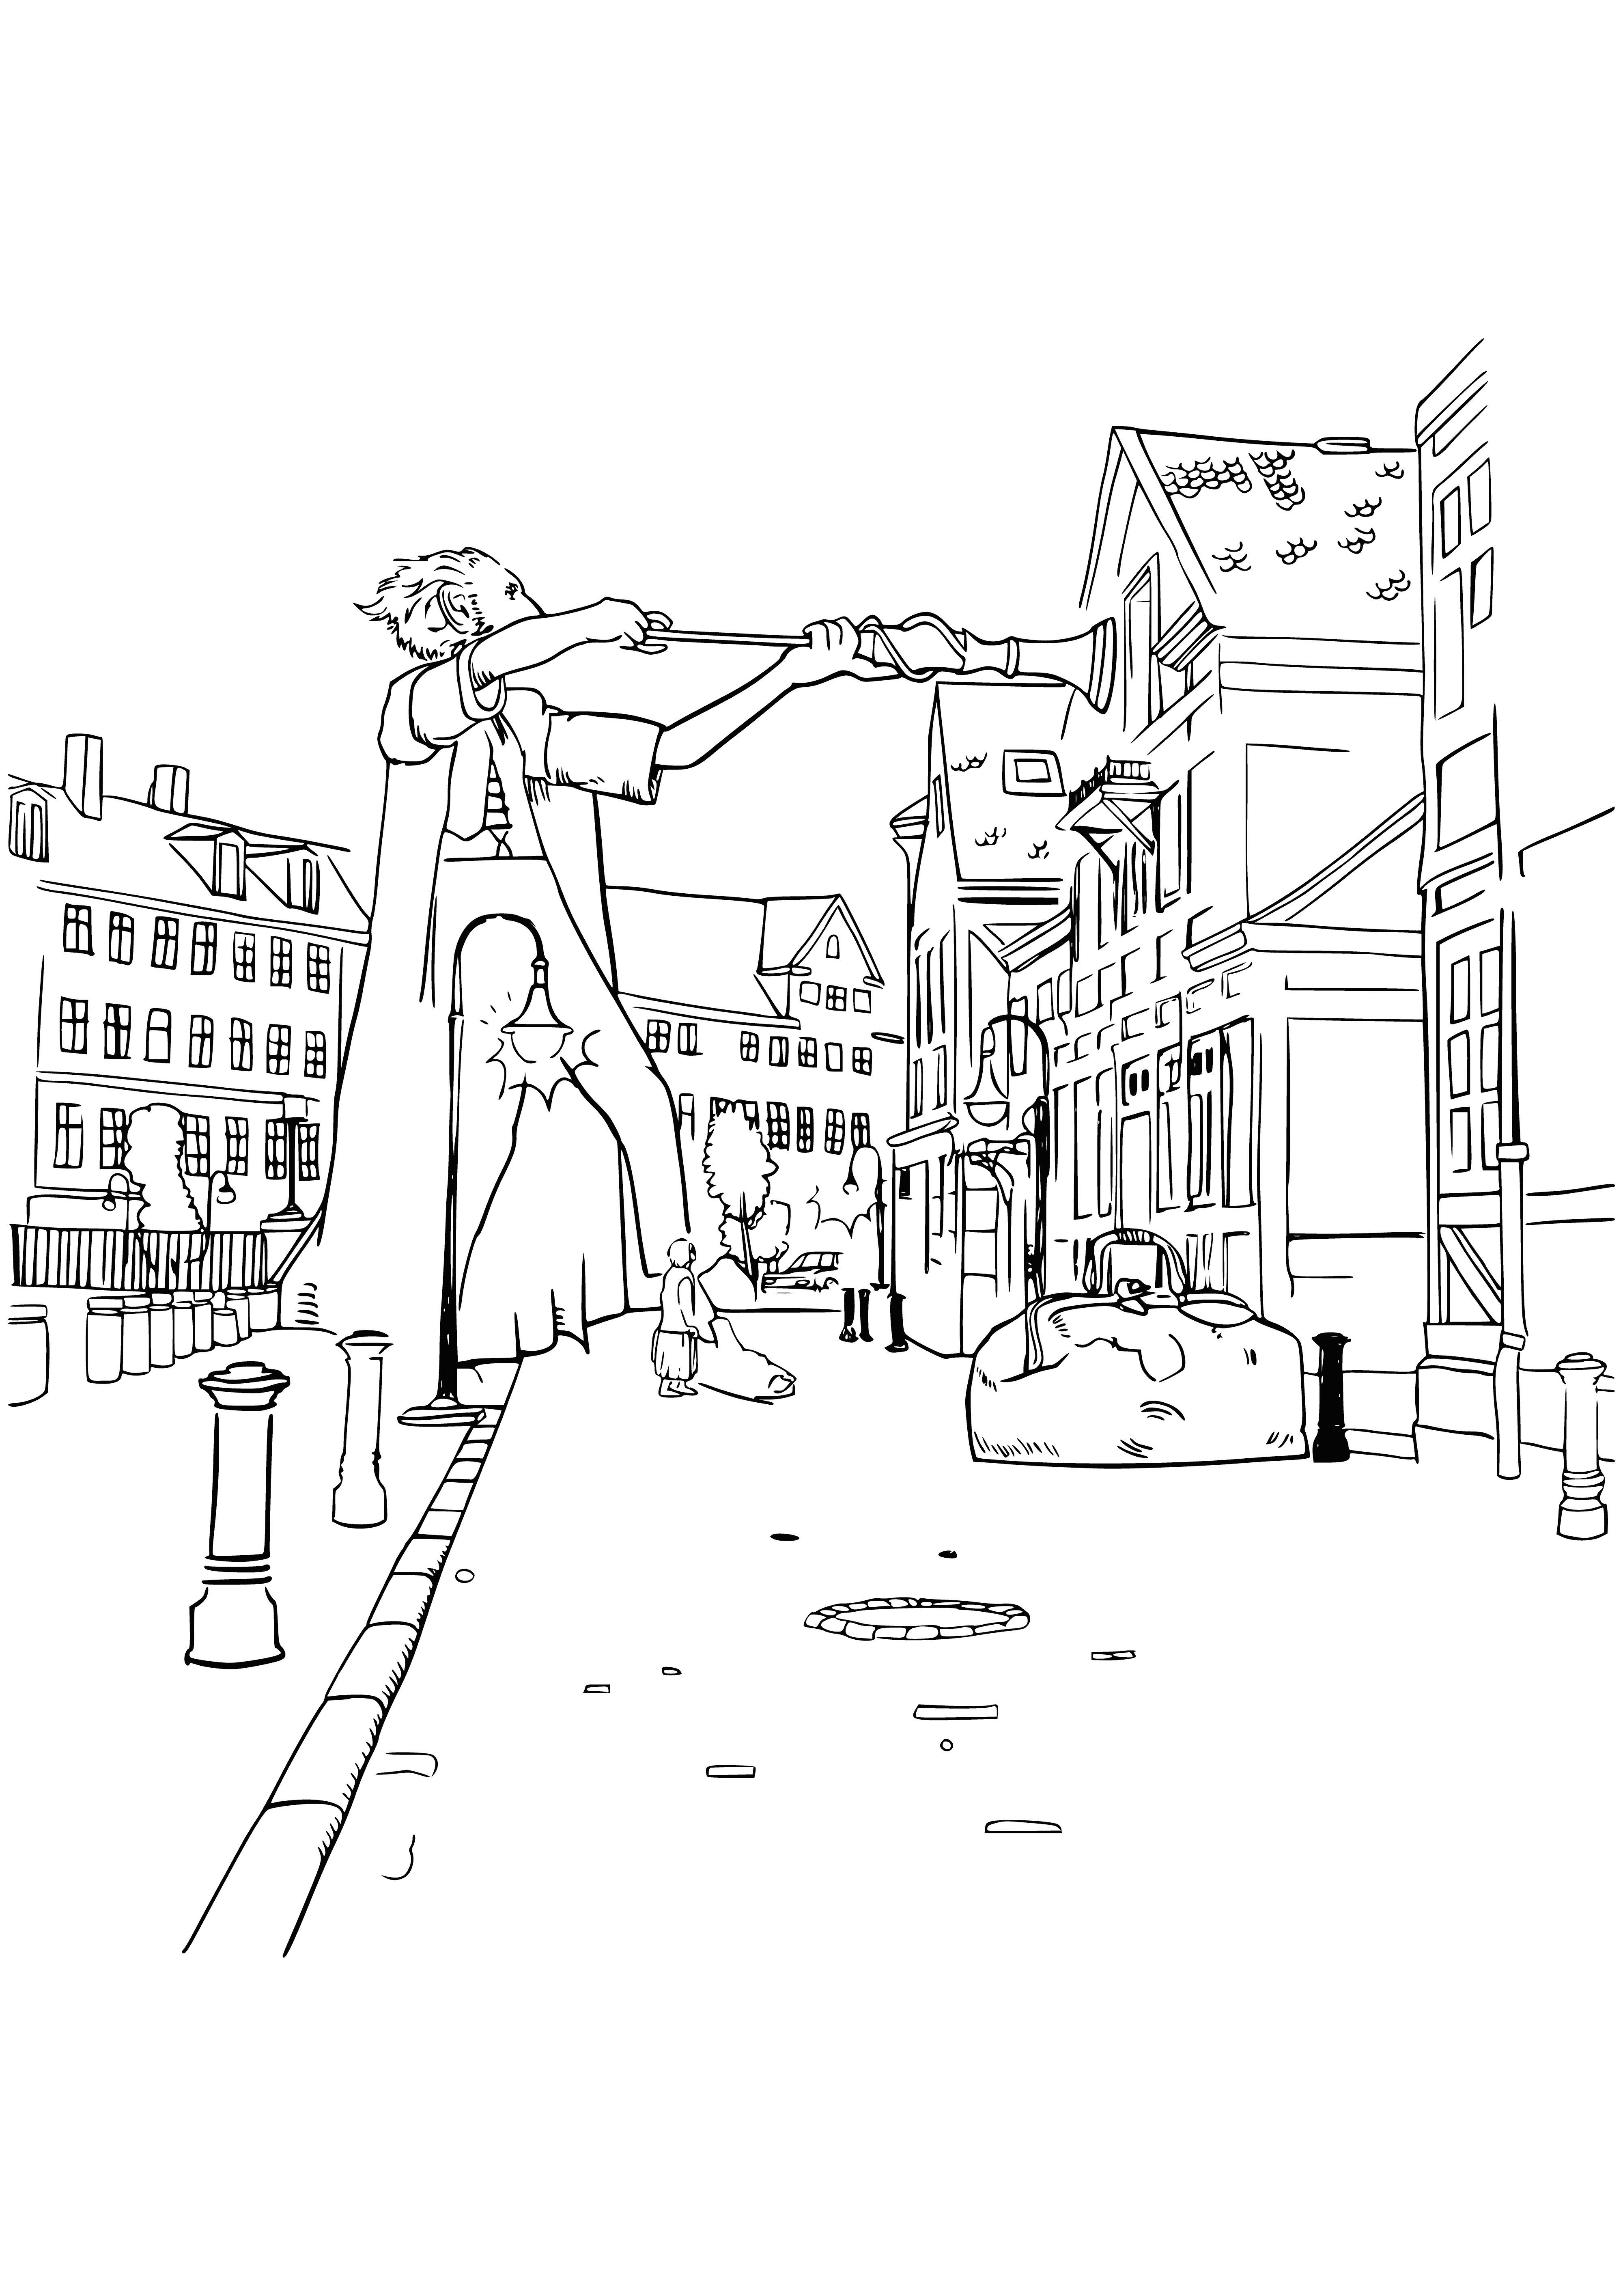 The giant in the city coloring page